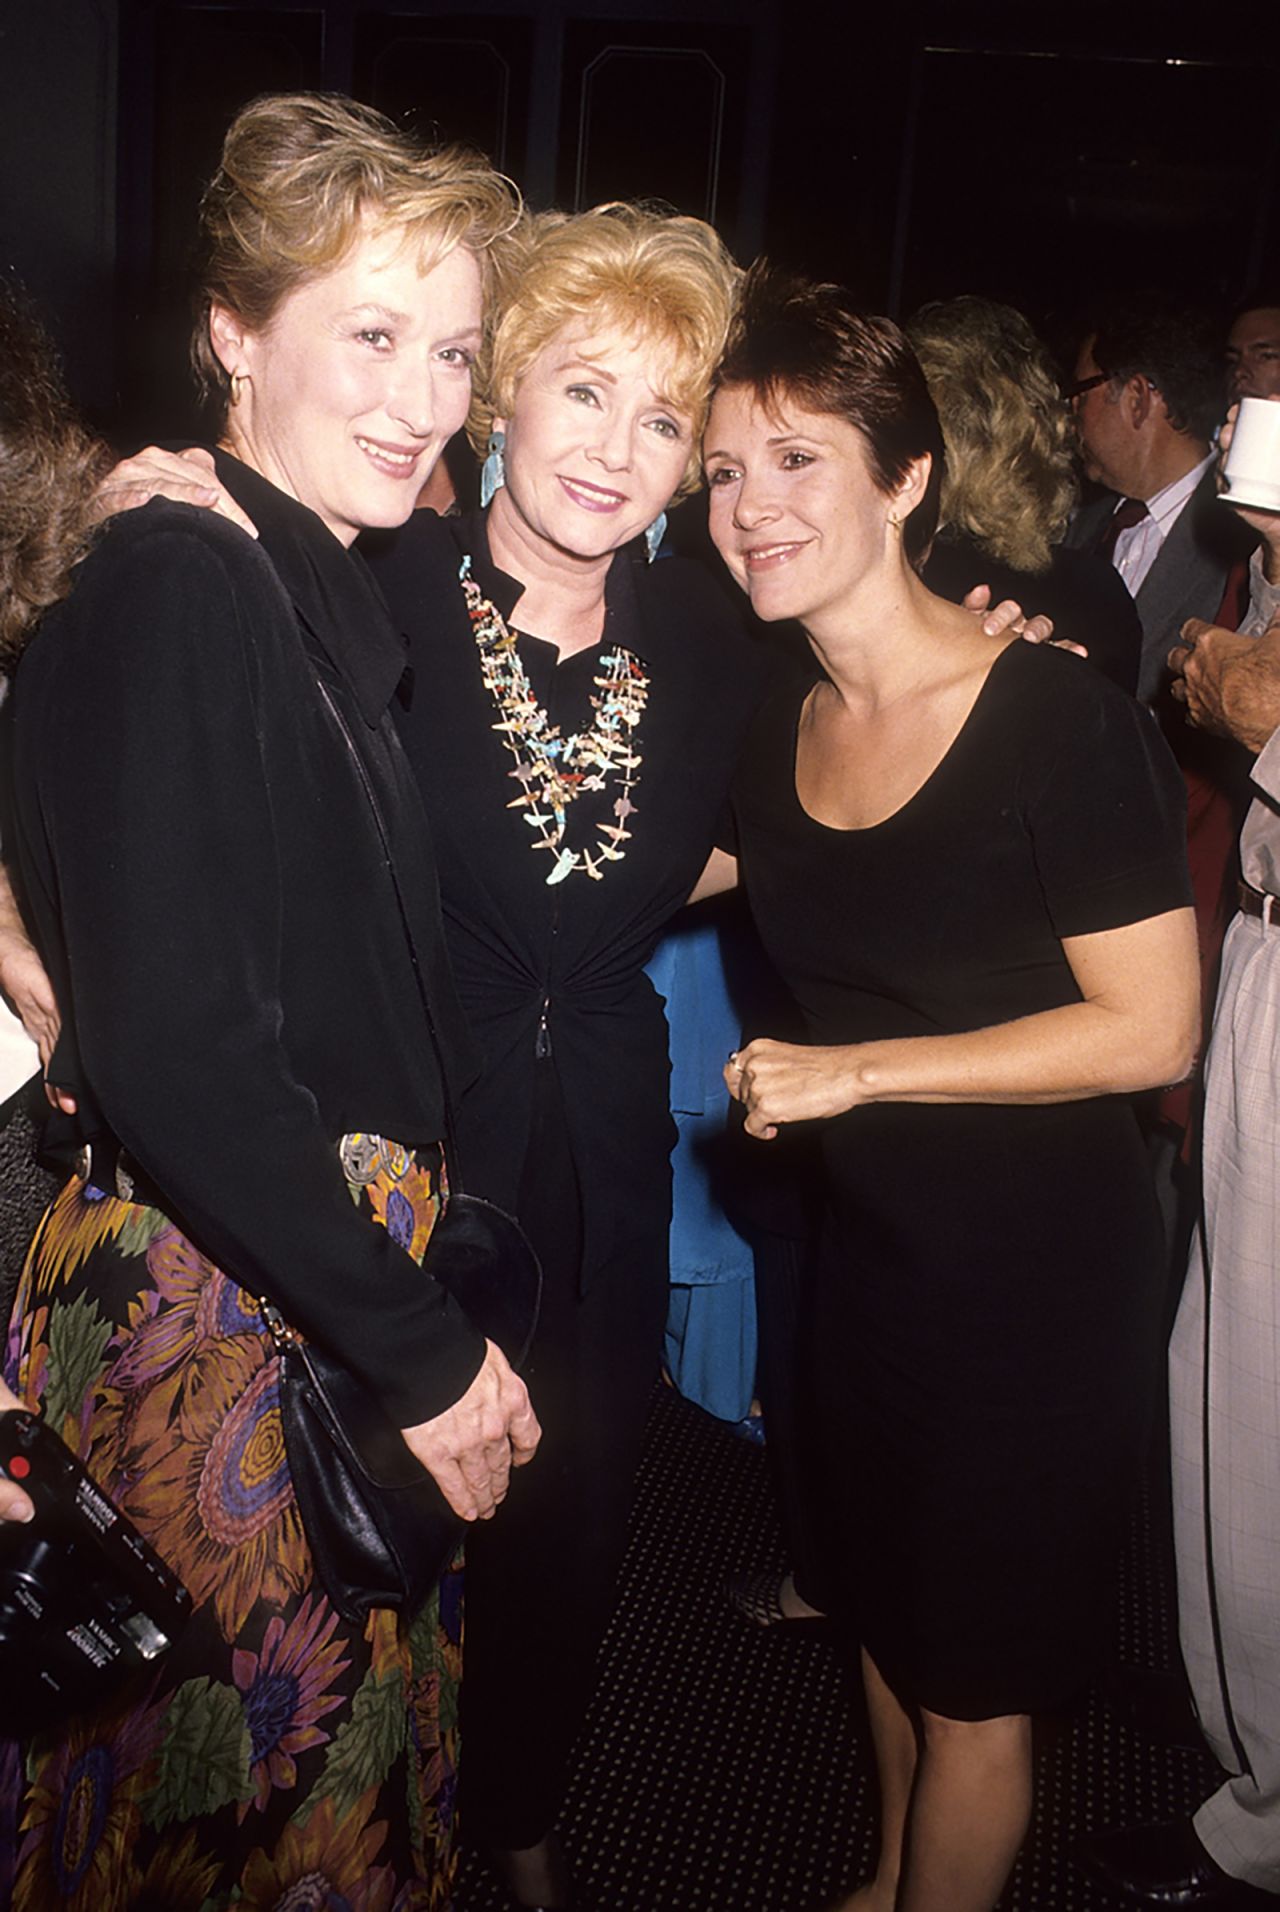 From left, Meryl Streep, Reynolds and Fisher attend the premiere of the film "Postcards from the Edge" in 1990. The film was an adaptation of Fisher's 1987 novel of the same name, and Streep played a character based on Fisher.